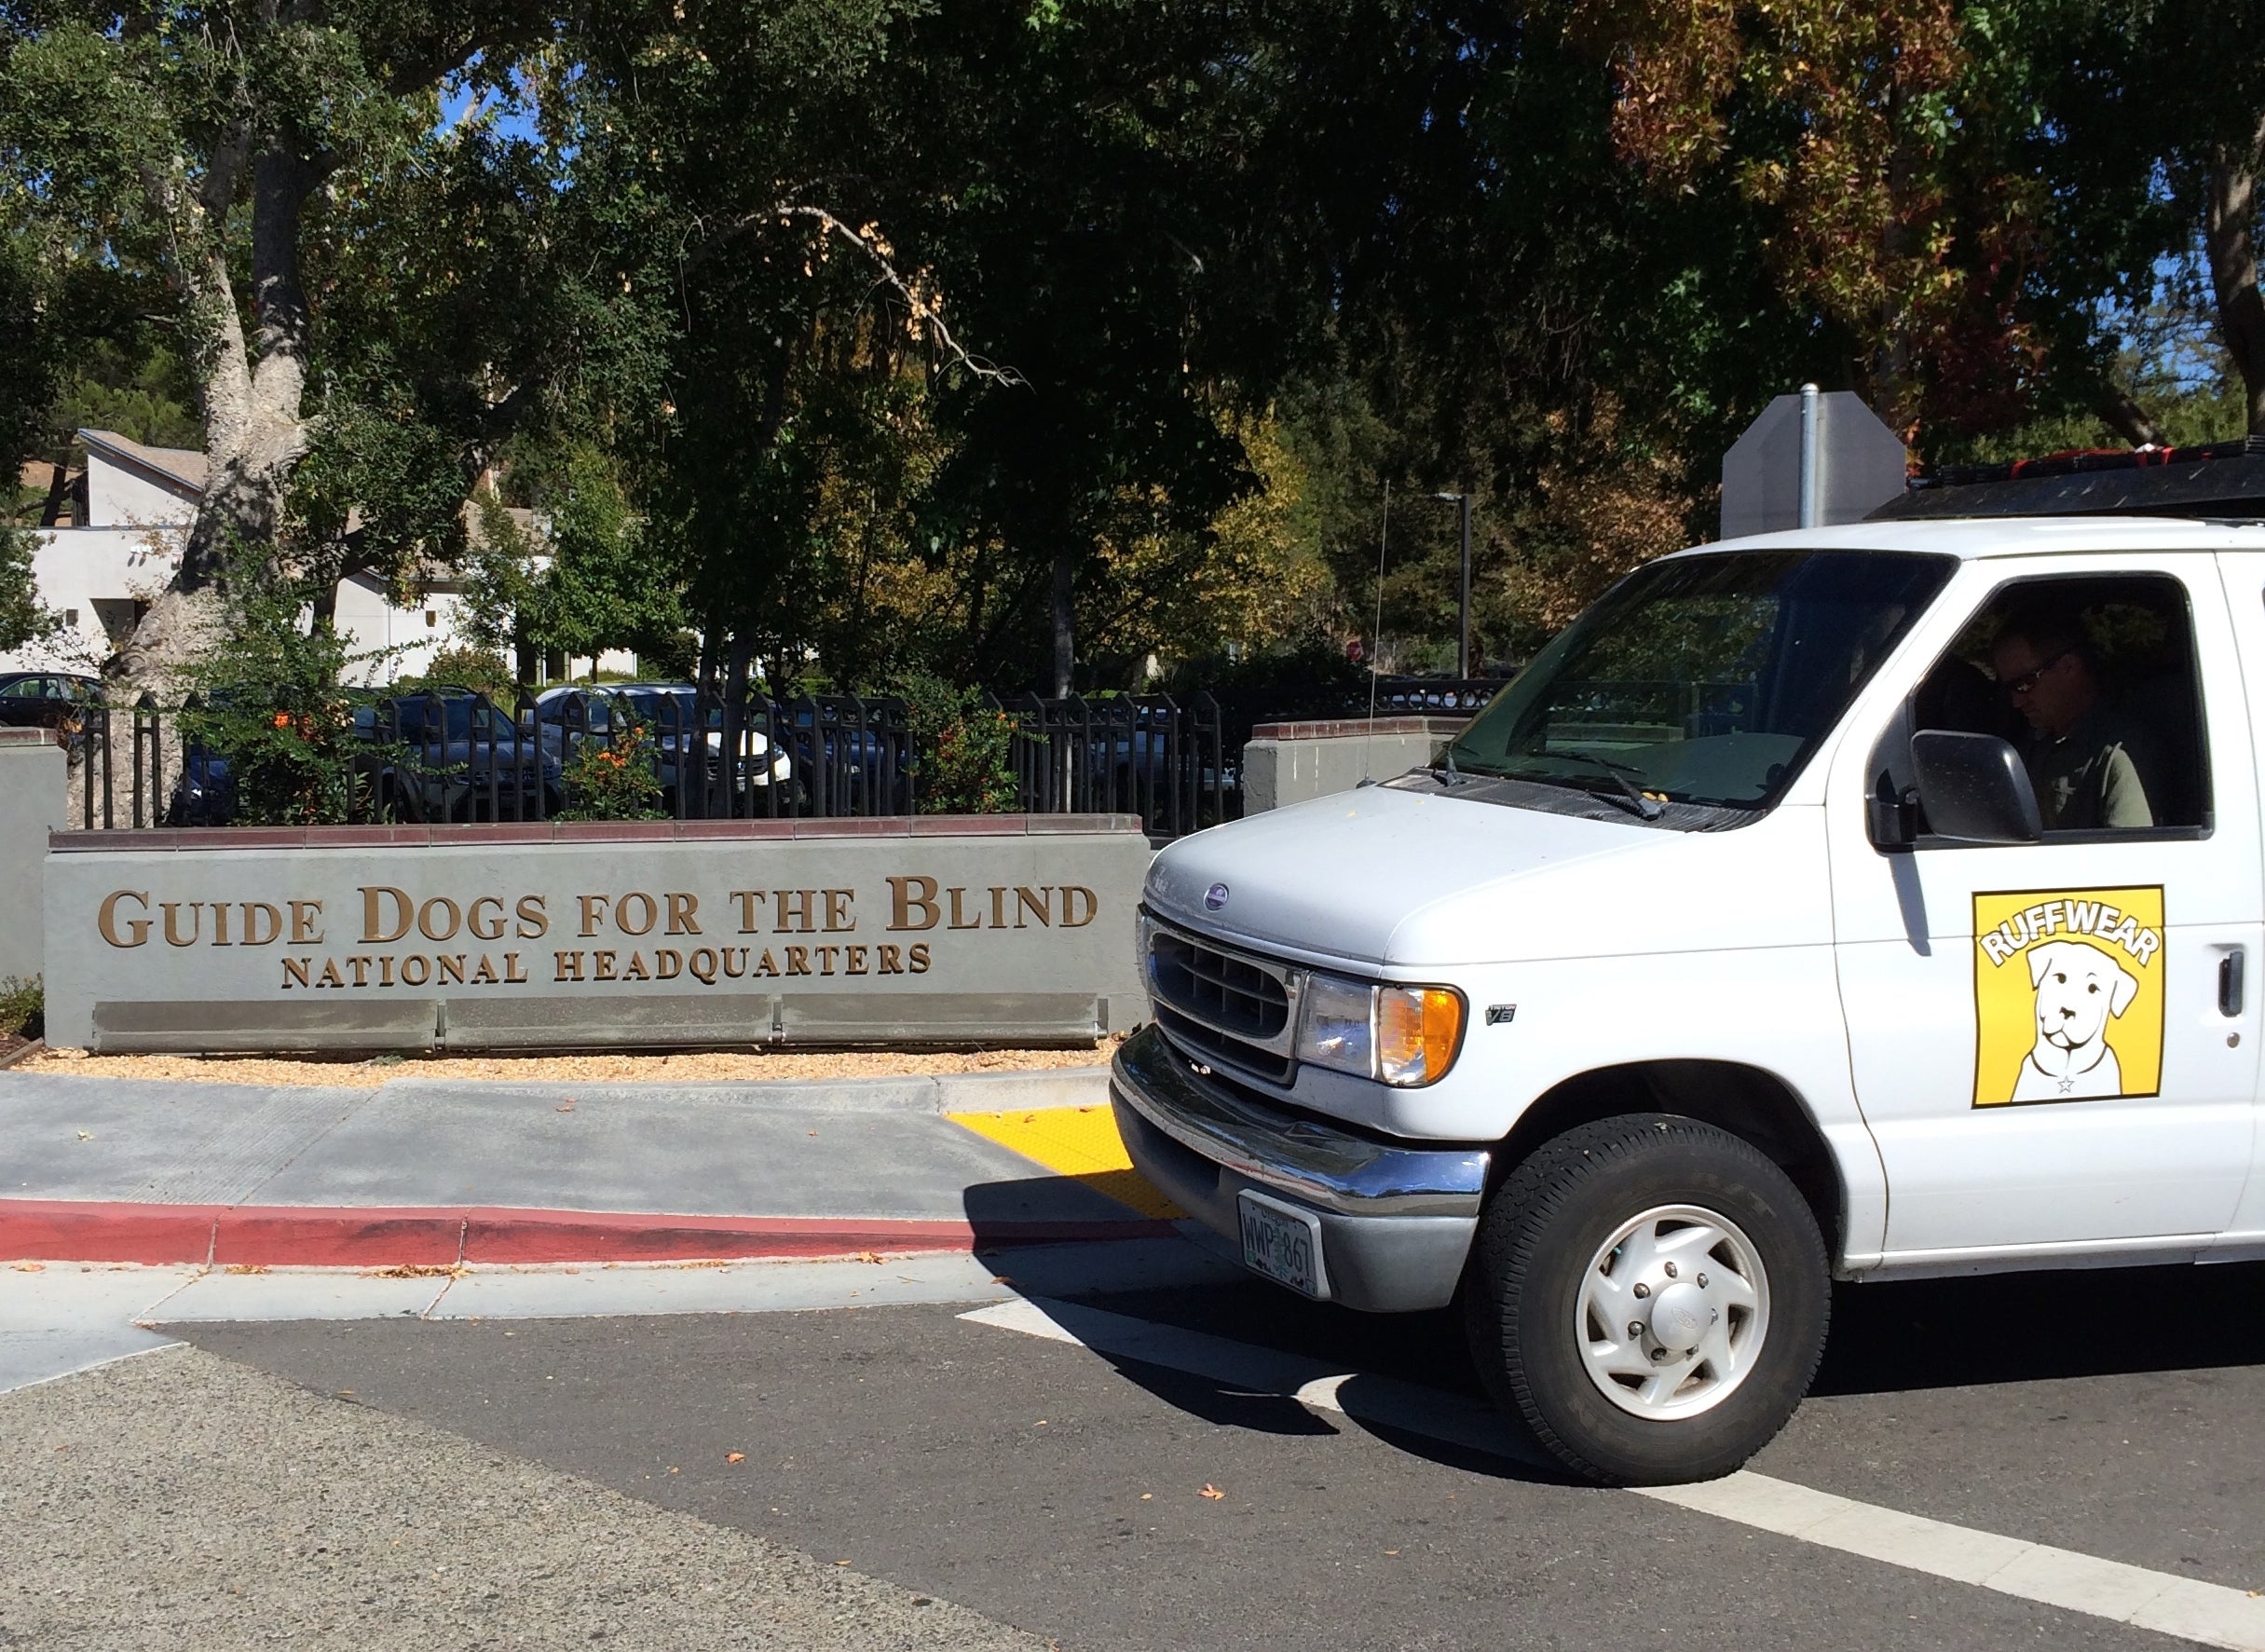 The Ruffwear van is parked in front of the Guide Dogs for the Blind campus sign. 